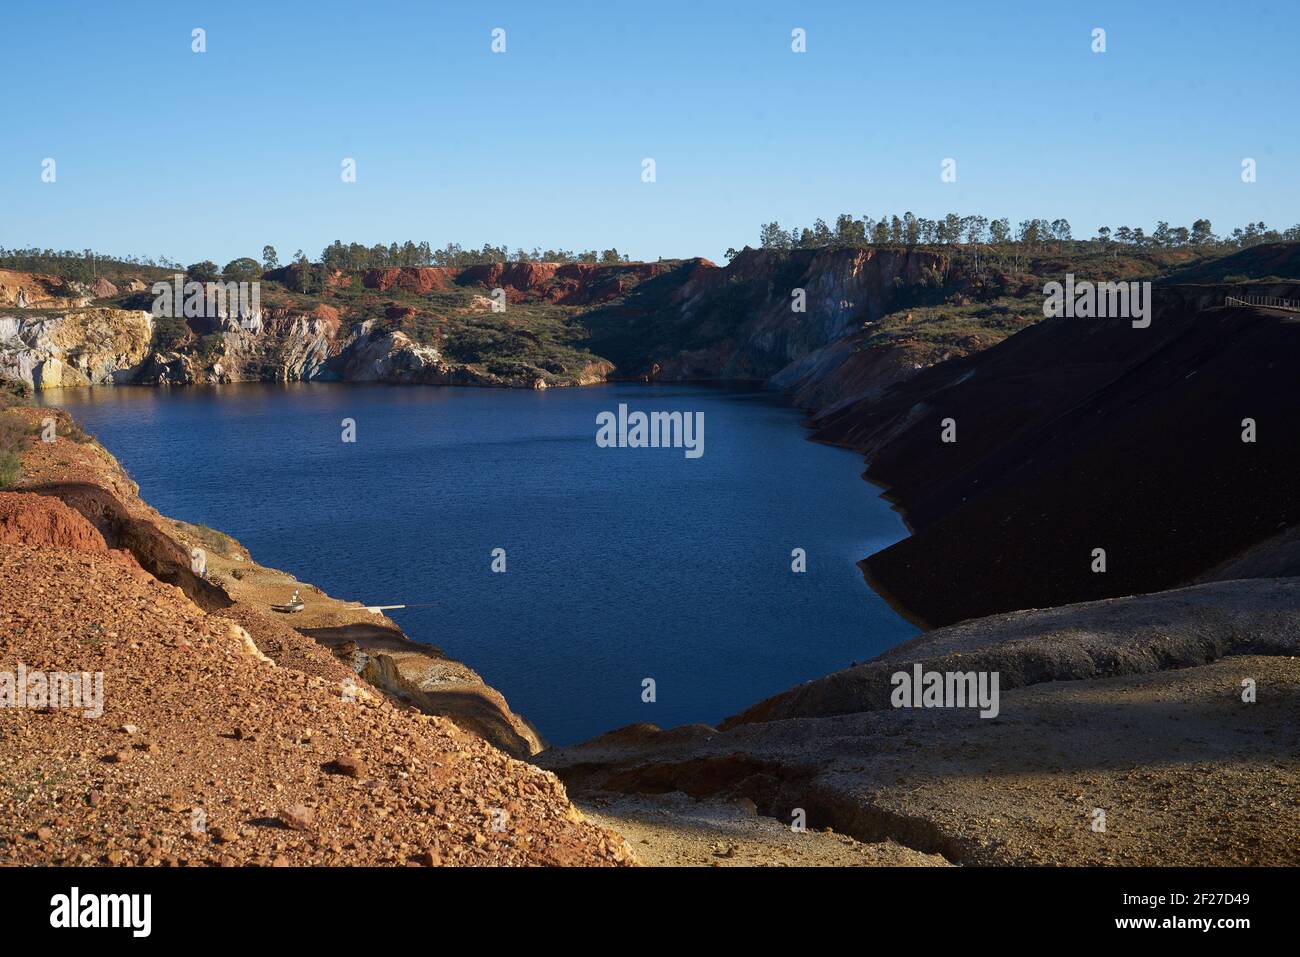 Contaminated pond lake of an old abandoned mine red landscape in Mina de Sao Domingos, Portugal Stock Photo